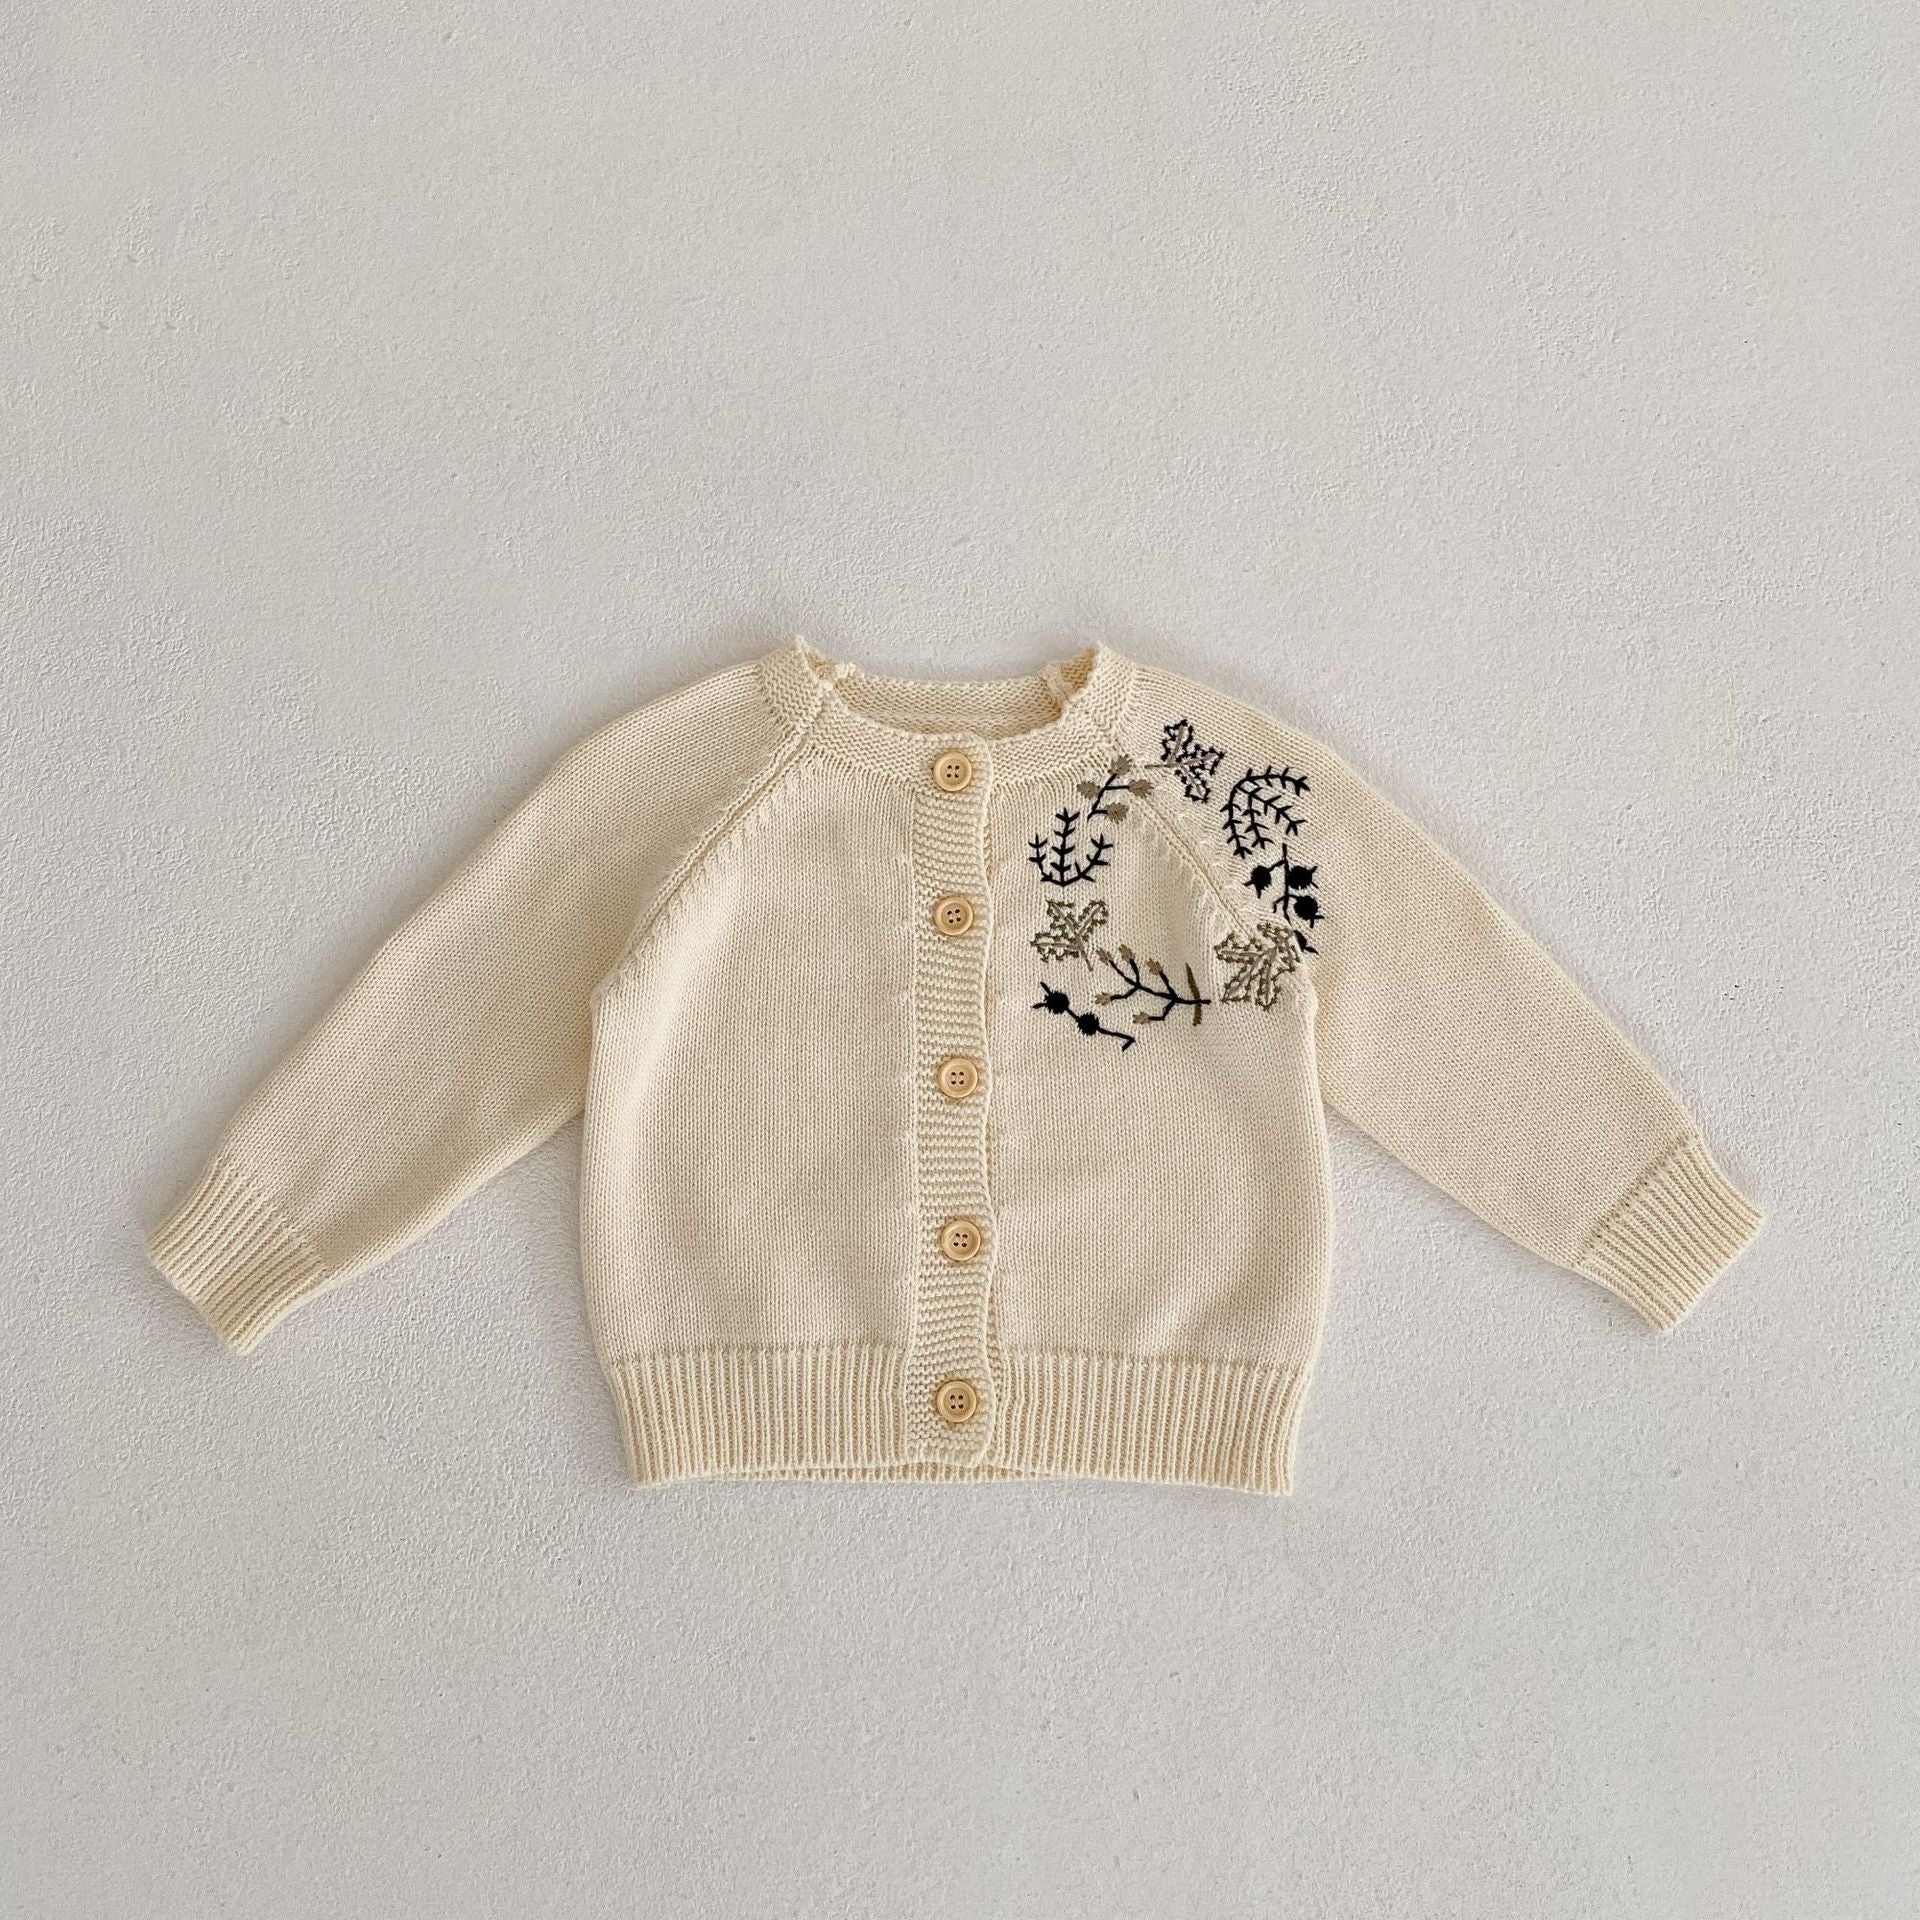 Embroidered wreath design cardigan/overalls [N3013]